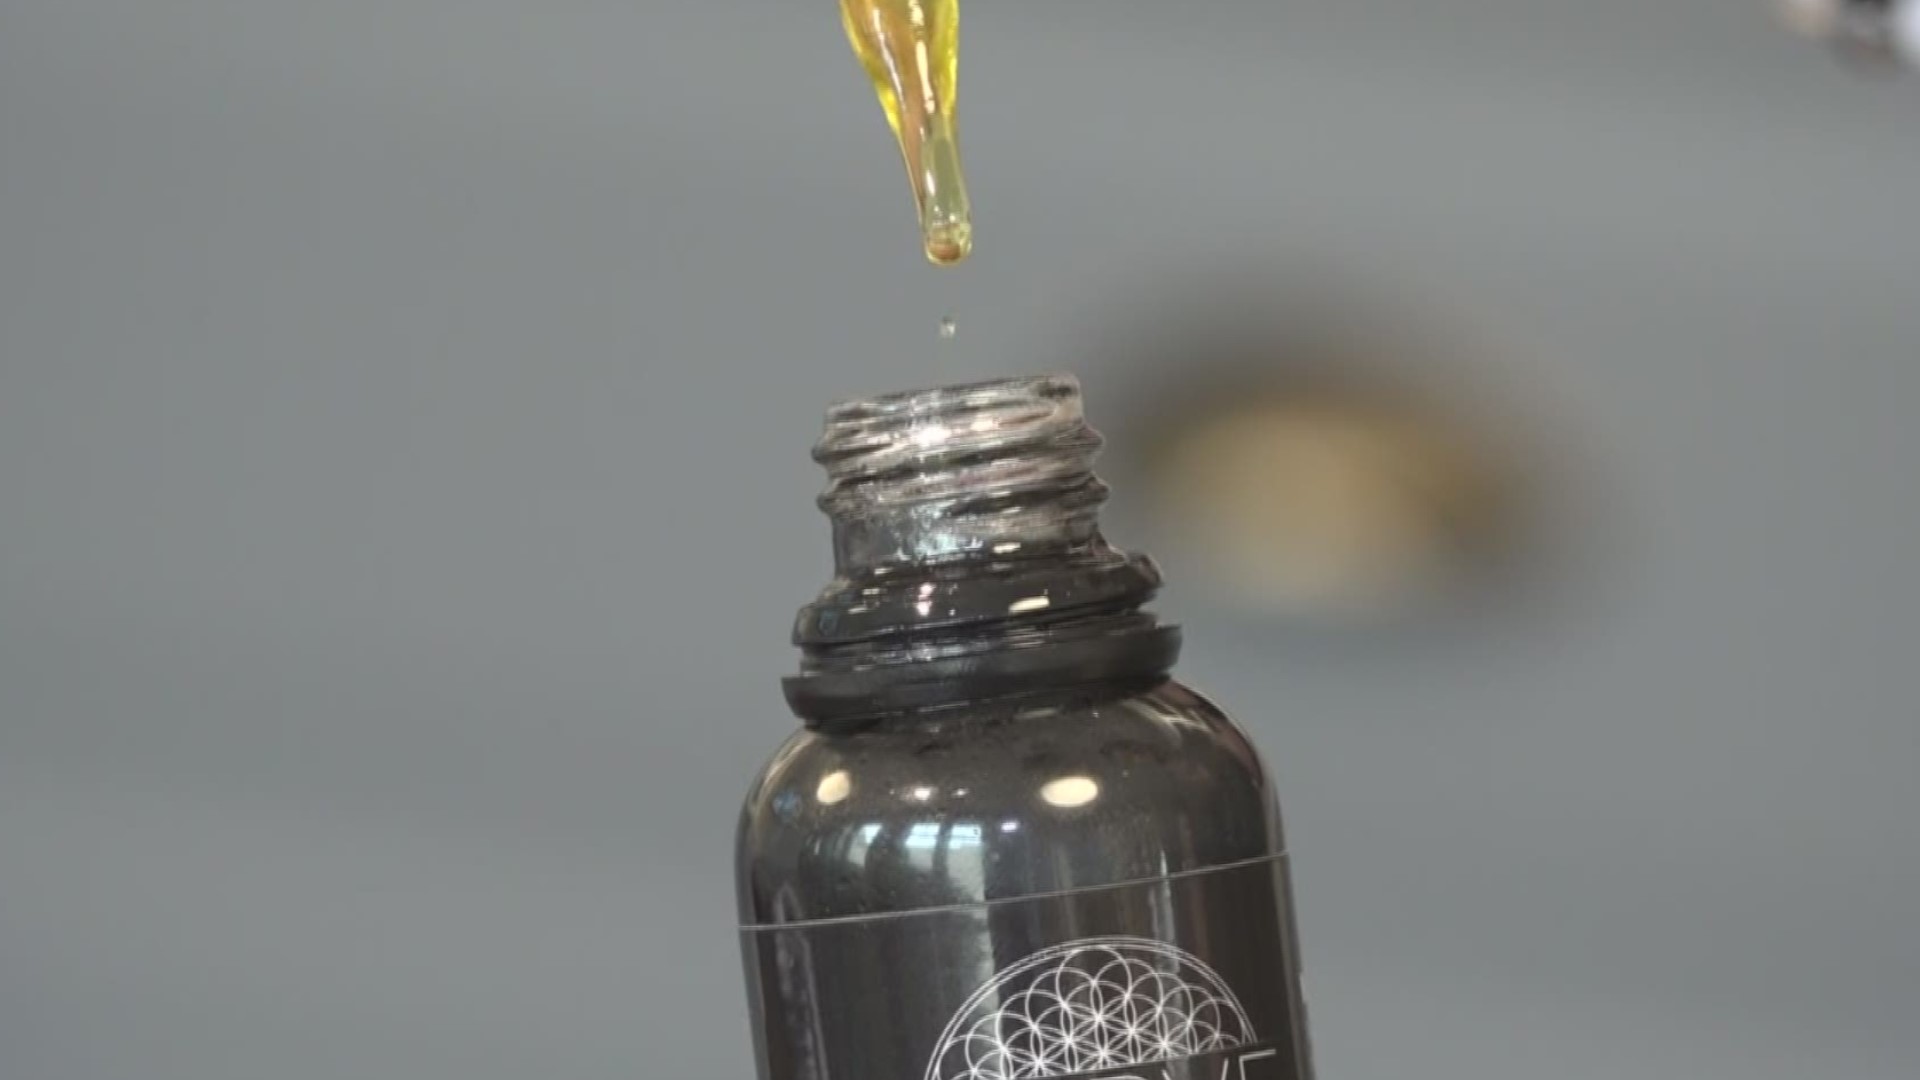 The Sarasota Police Department says businesses will get two warnings to stop selling CBD products before they're confiscated.